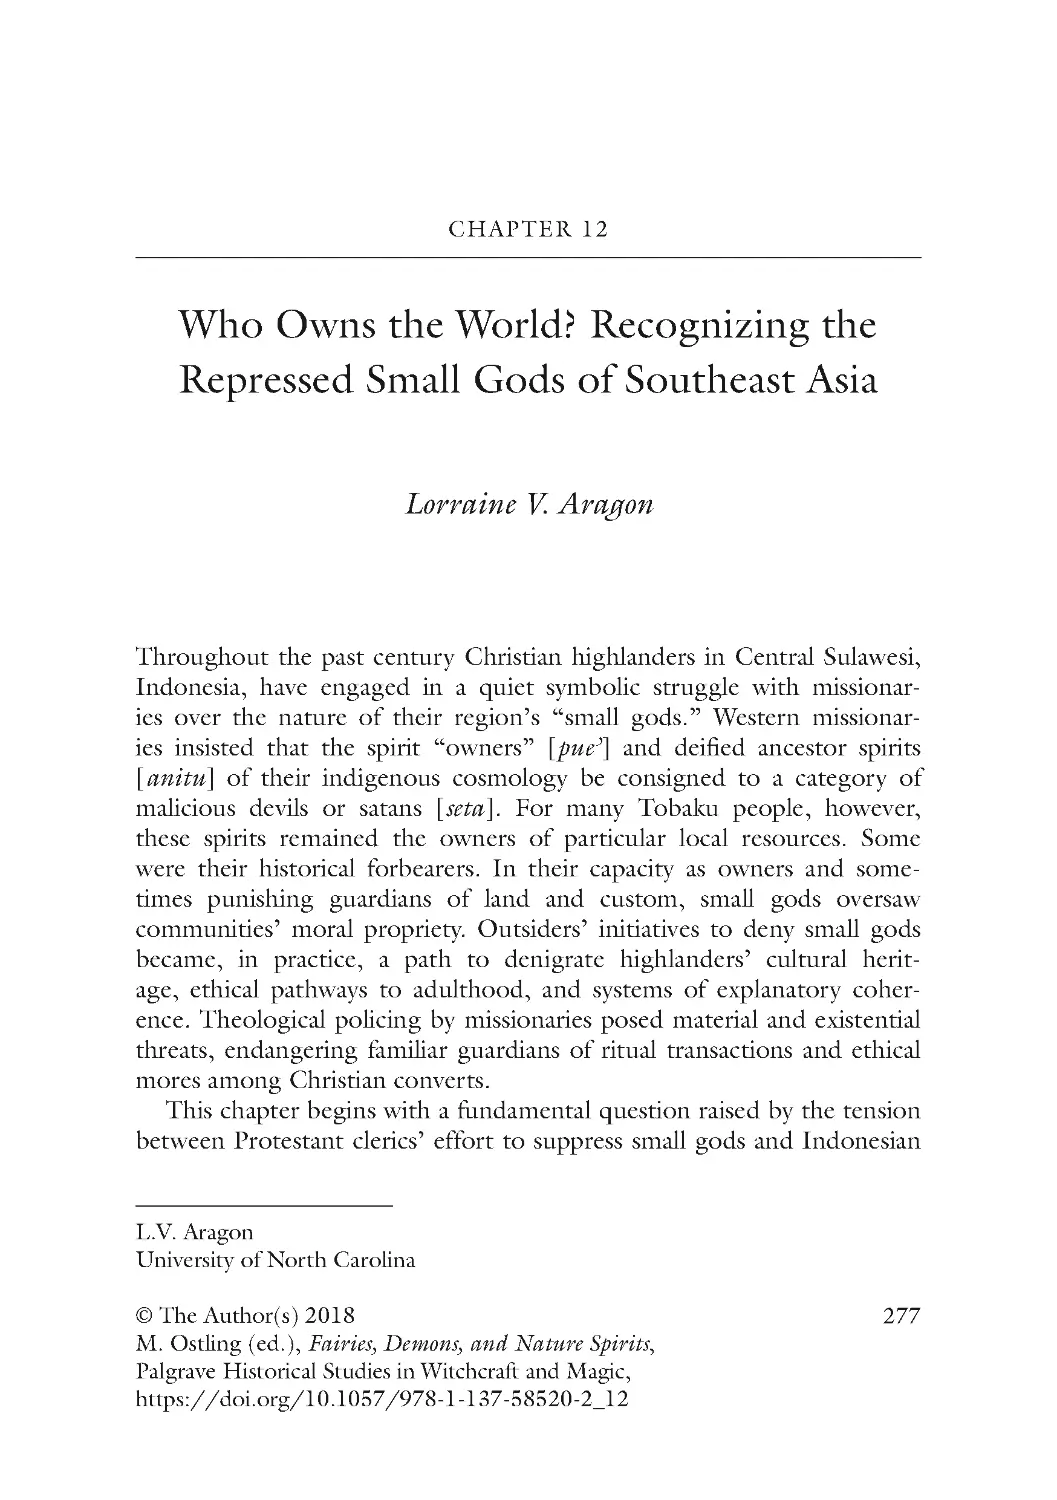 Chapter 12 Who Owns the World? Recognizing the Repressed Small Gods of Southeast Asia